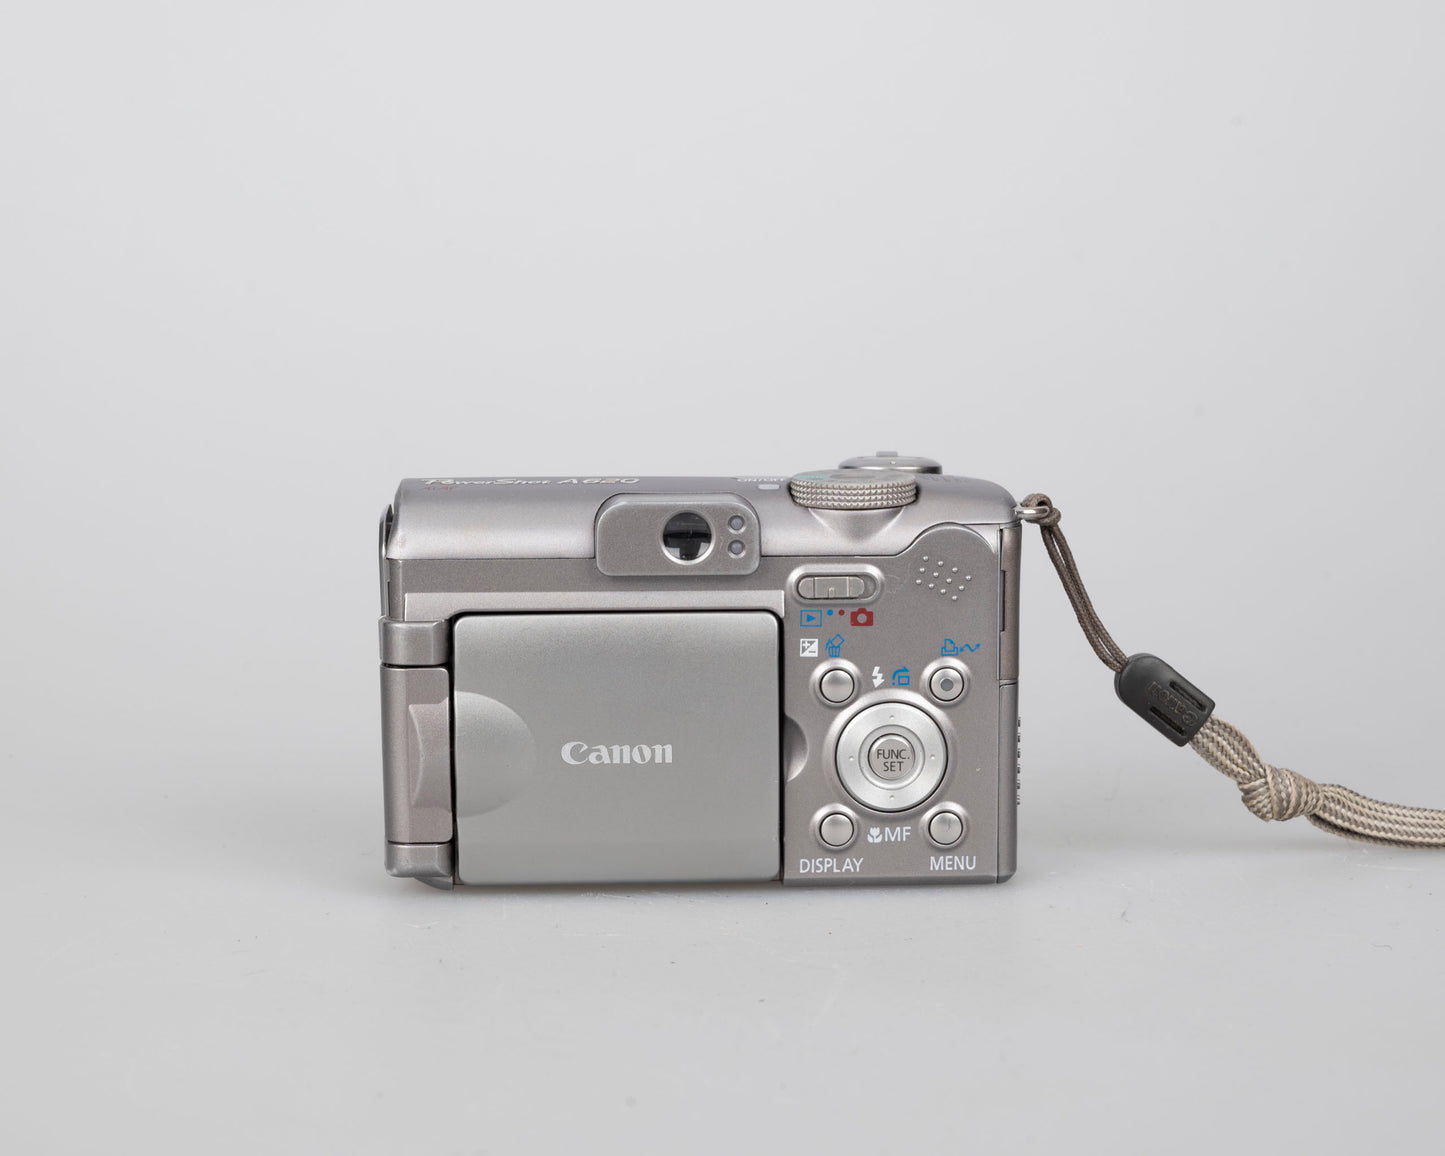 Canon Powershot A620 digicam w/ 7.1 MP CCD sensor; includes 32MB SD card (uses AA batteries)